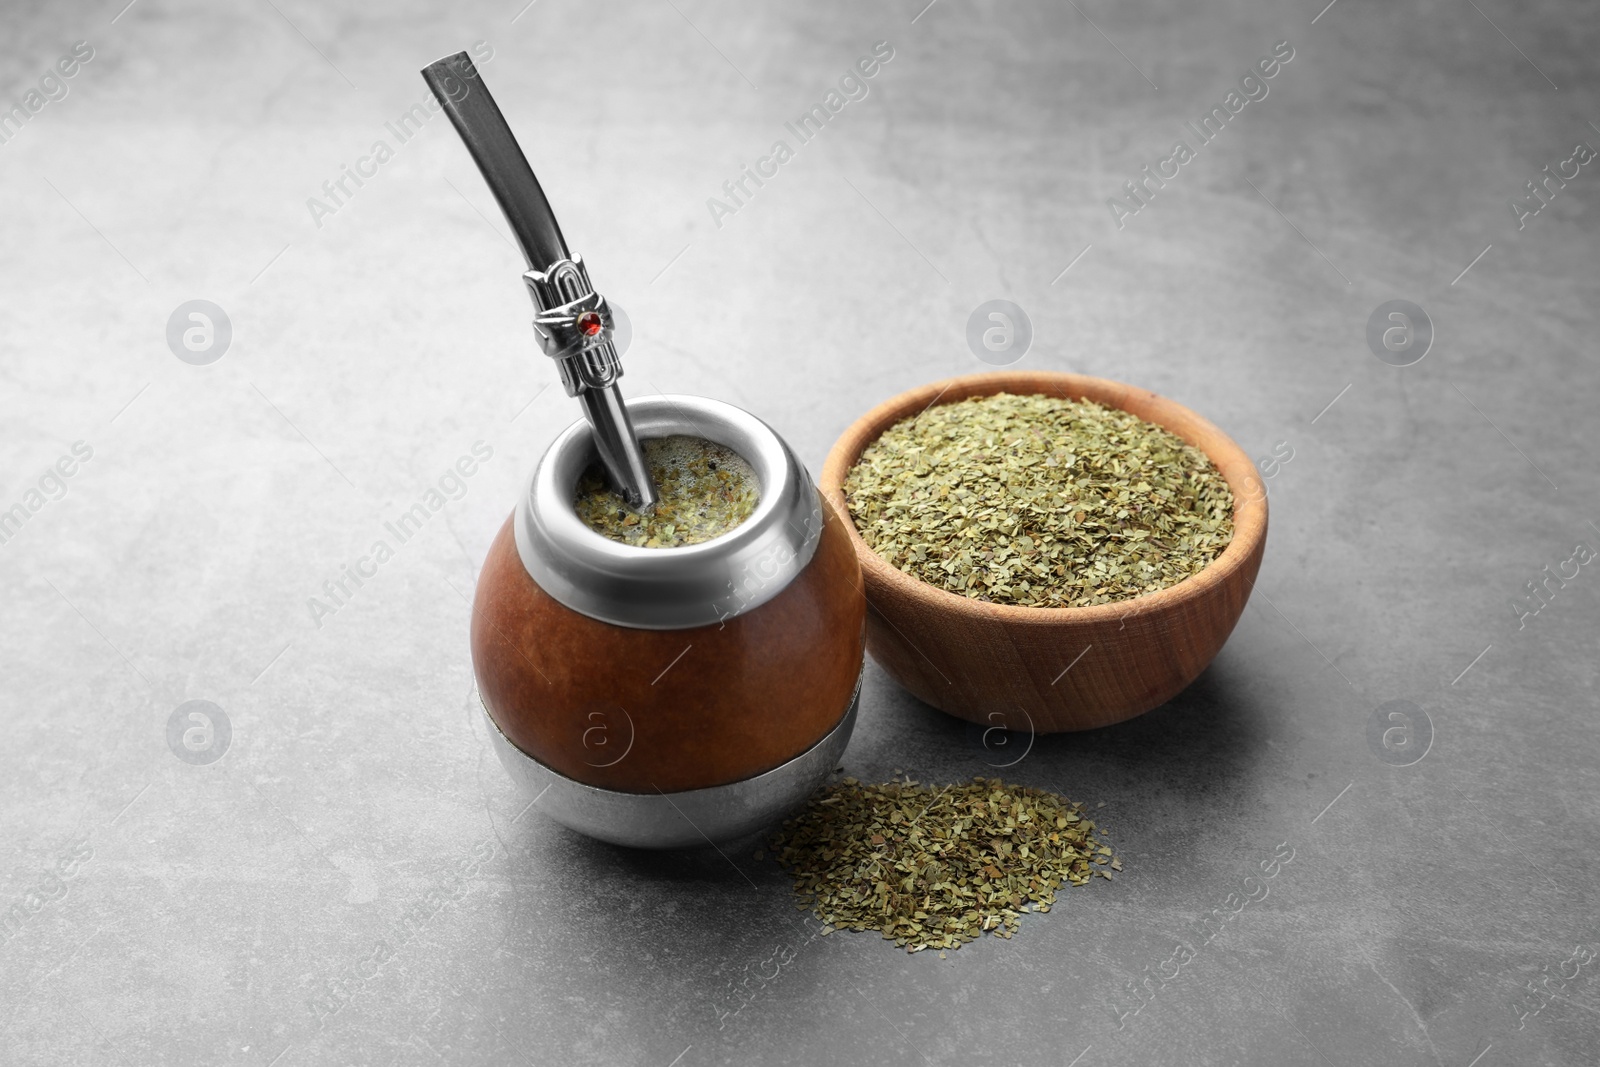 Photo of Calabash with bombilla and bowl of mate tea leaves on grey table